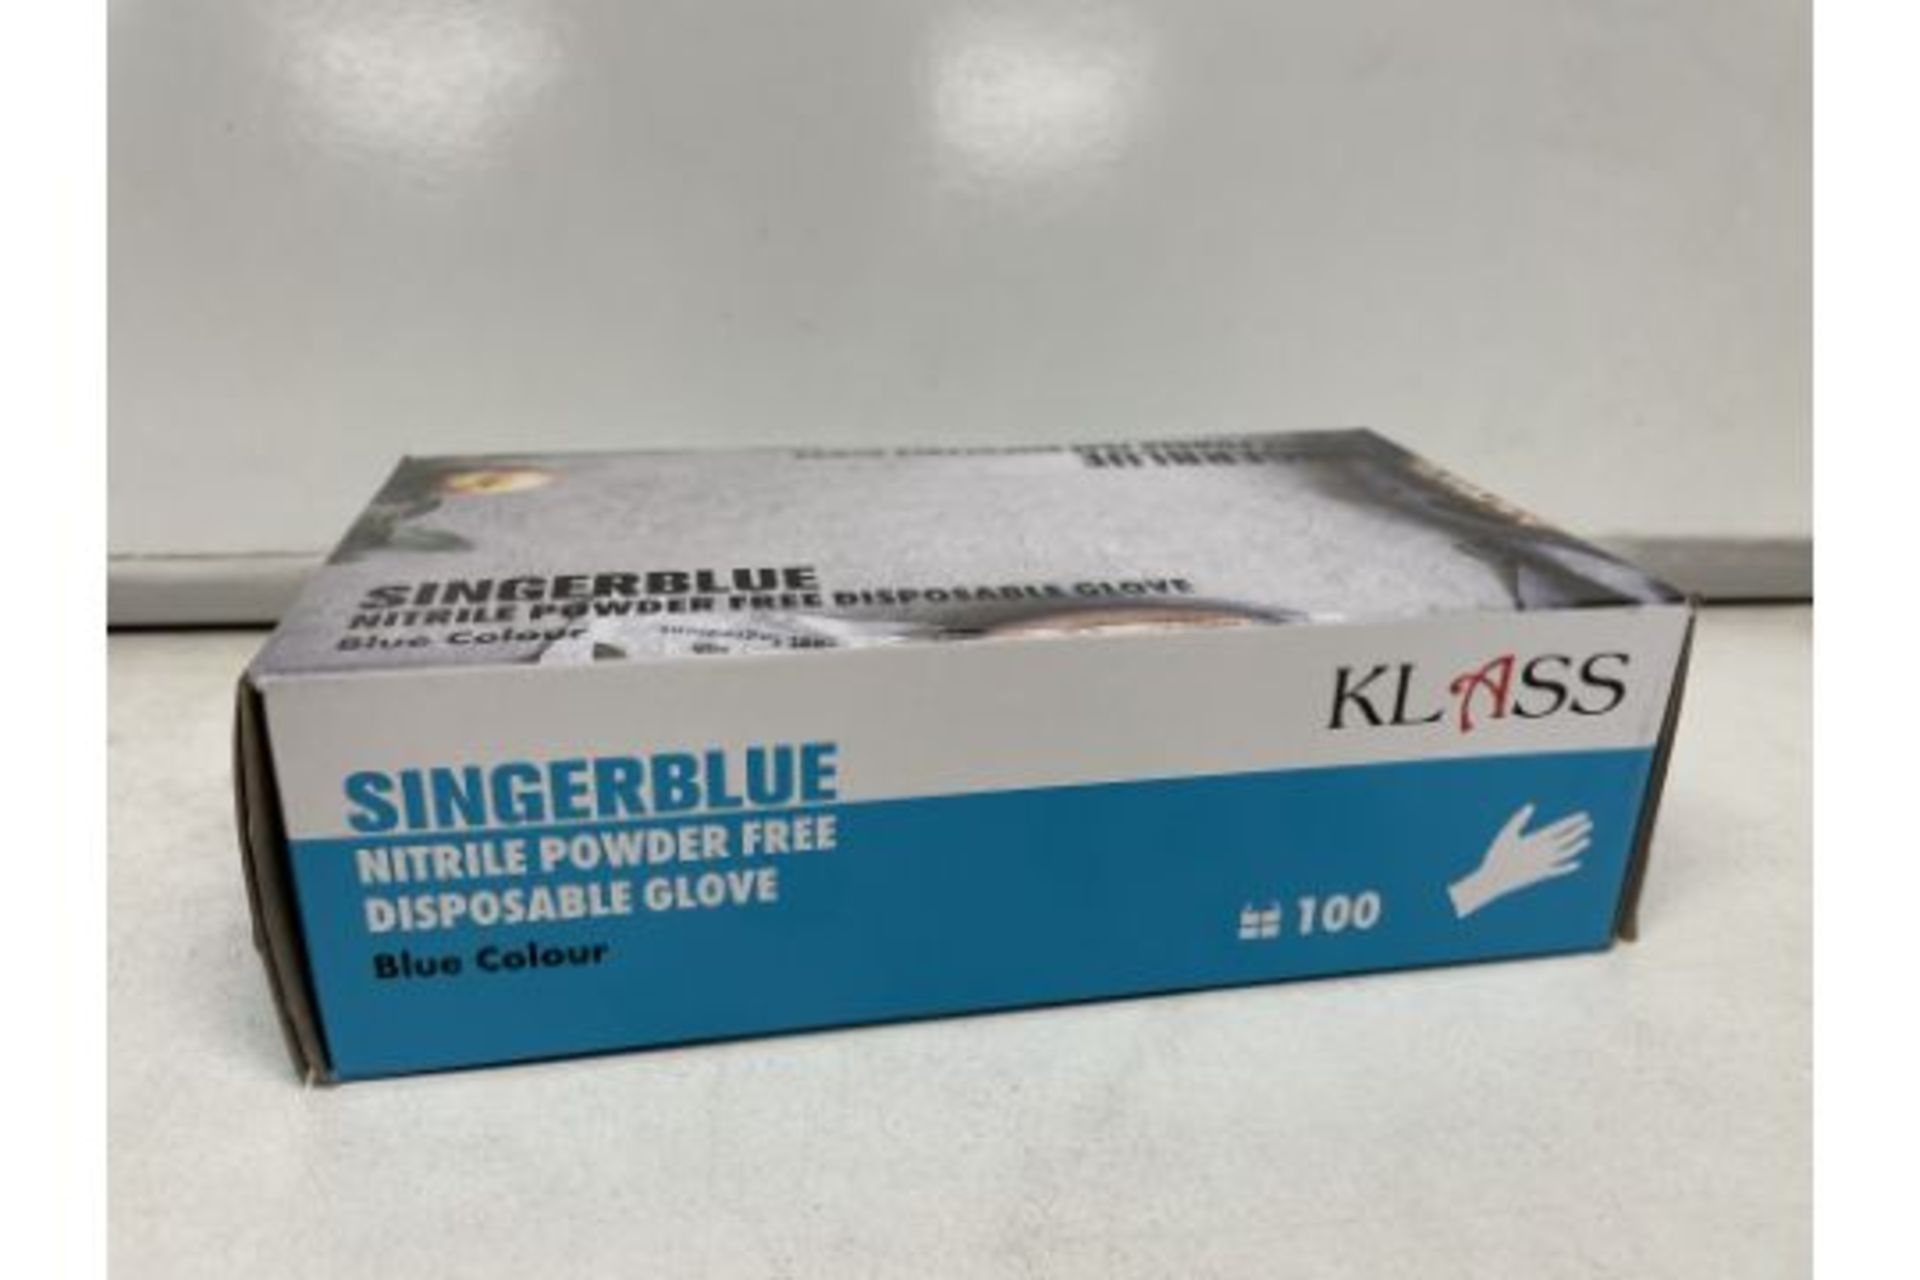 PALLET TO CONTAIN 400 X NEW BOXES OF 100 KLASS BLUE MARINE NITRILE POWDER FREE DISPOSABLE GLOVES. - Image 2 of 2